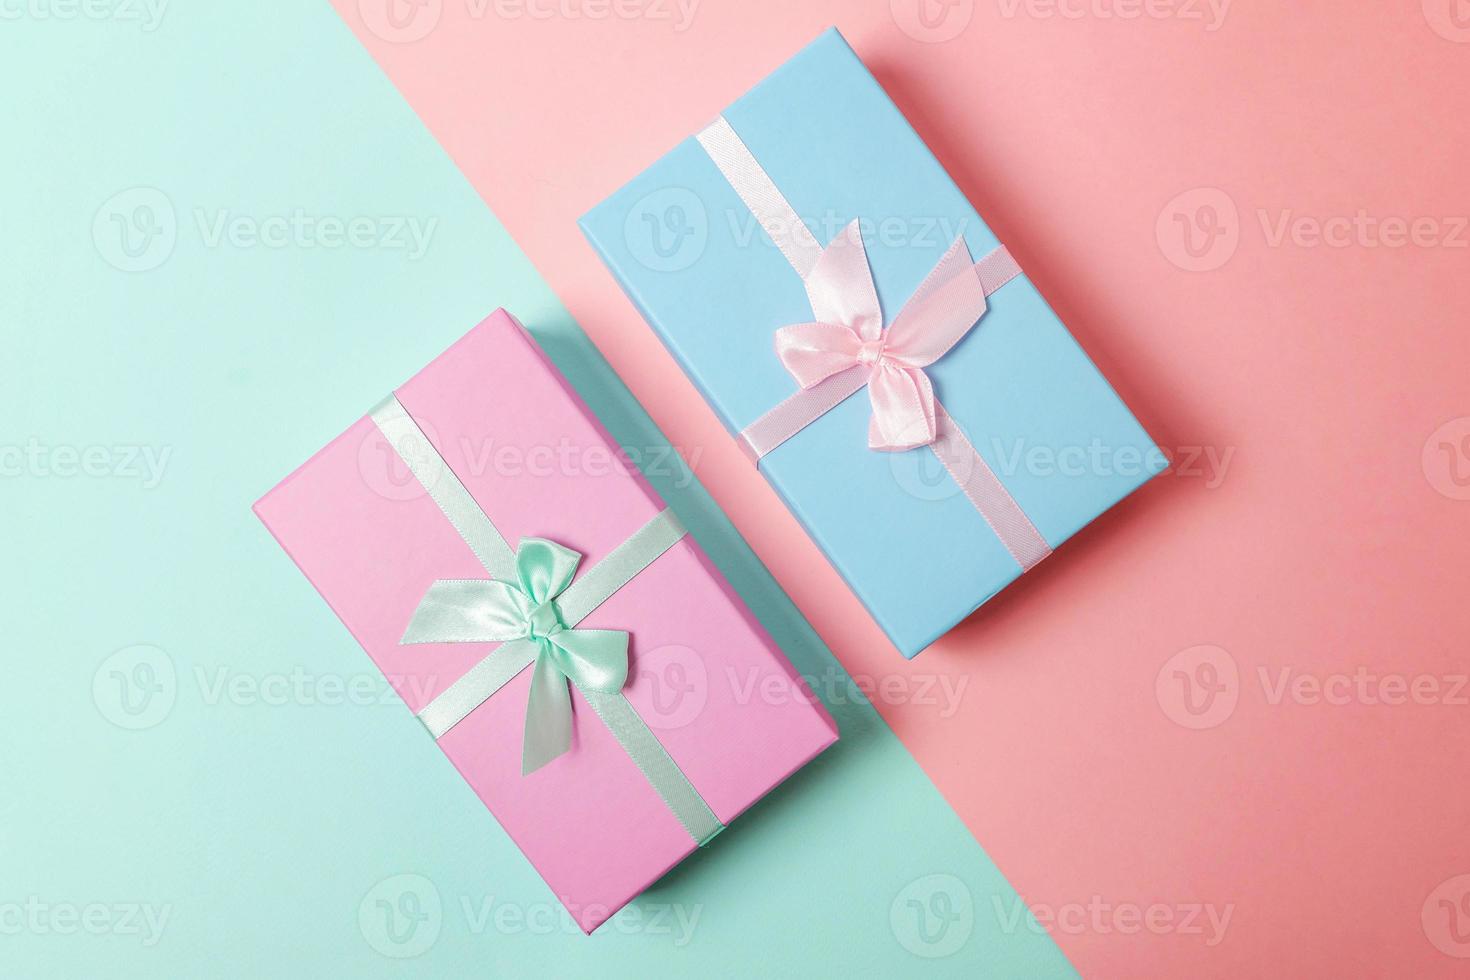 Small gift box wrapped pink and blue paper isolated on blue and pink pastel colorful trendy geometric background. Christmas New Year birthday valentine celebration present romantic concept. photo